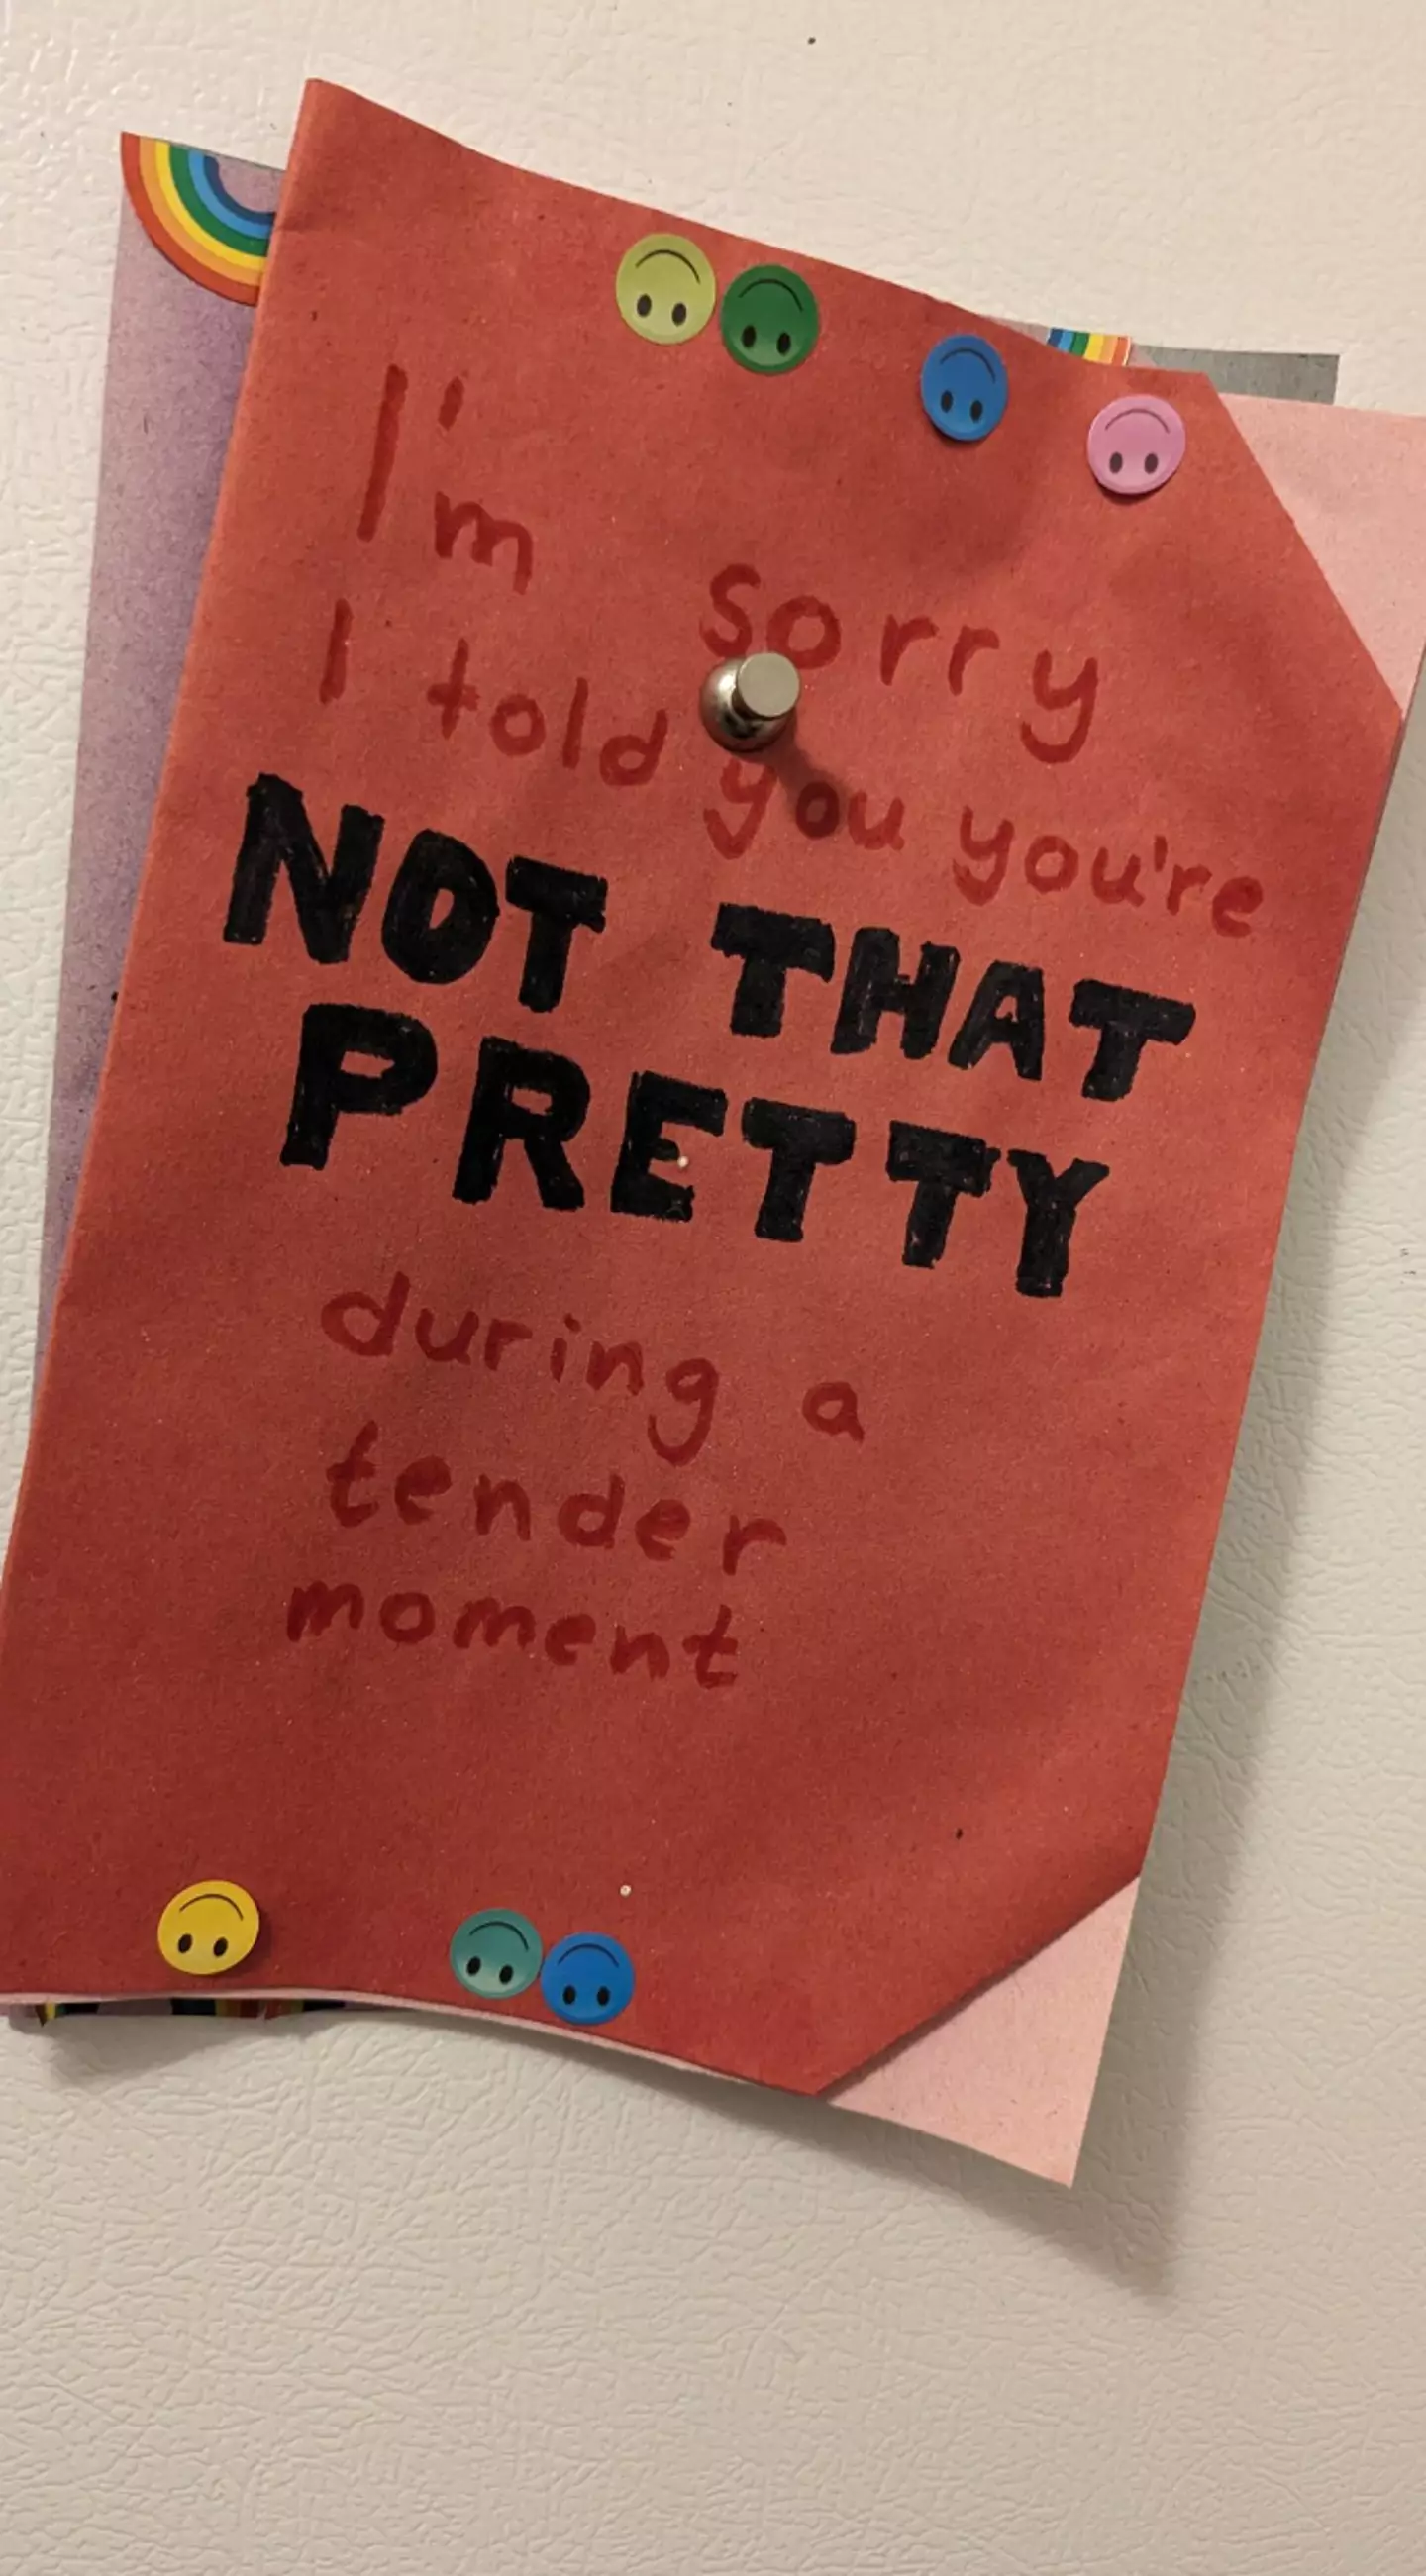 The card Aella received from her partner after he told her she's 'not that pretty'.